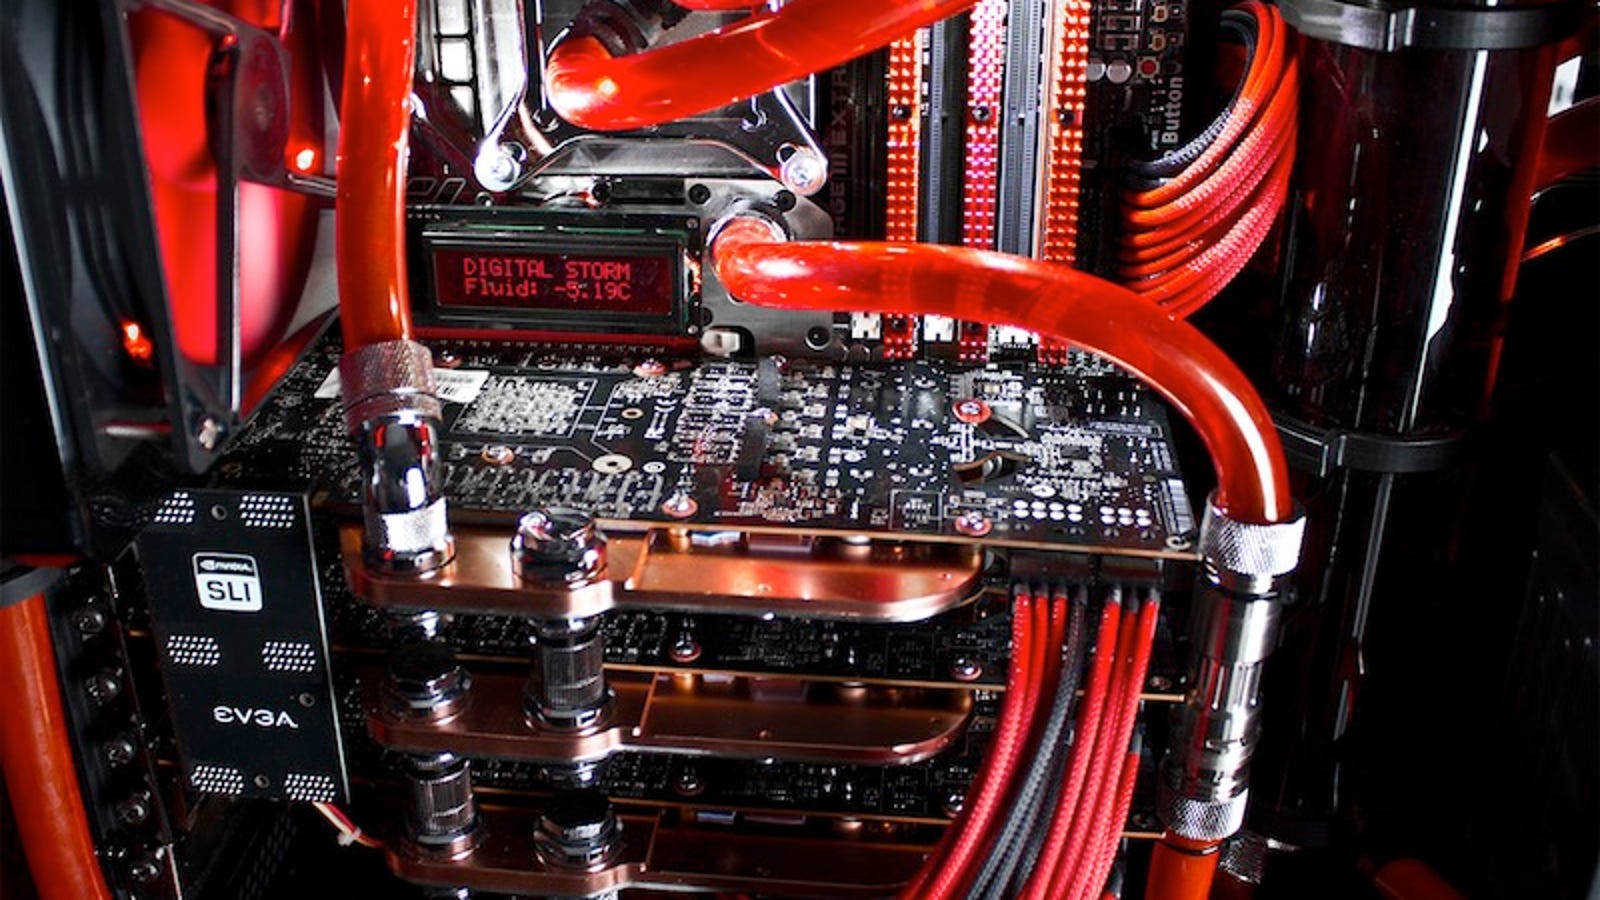 Digital Storm's New Gaming PCs Use Sub-Zero Liquid Cooling System for